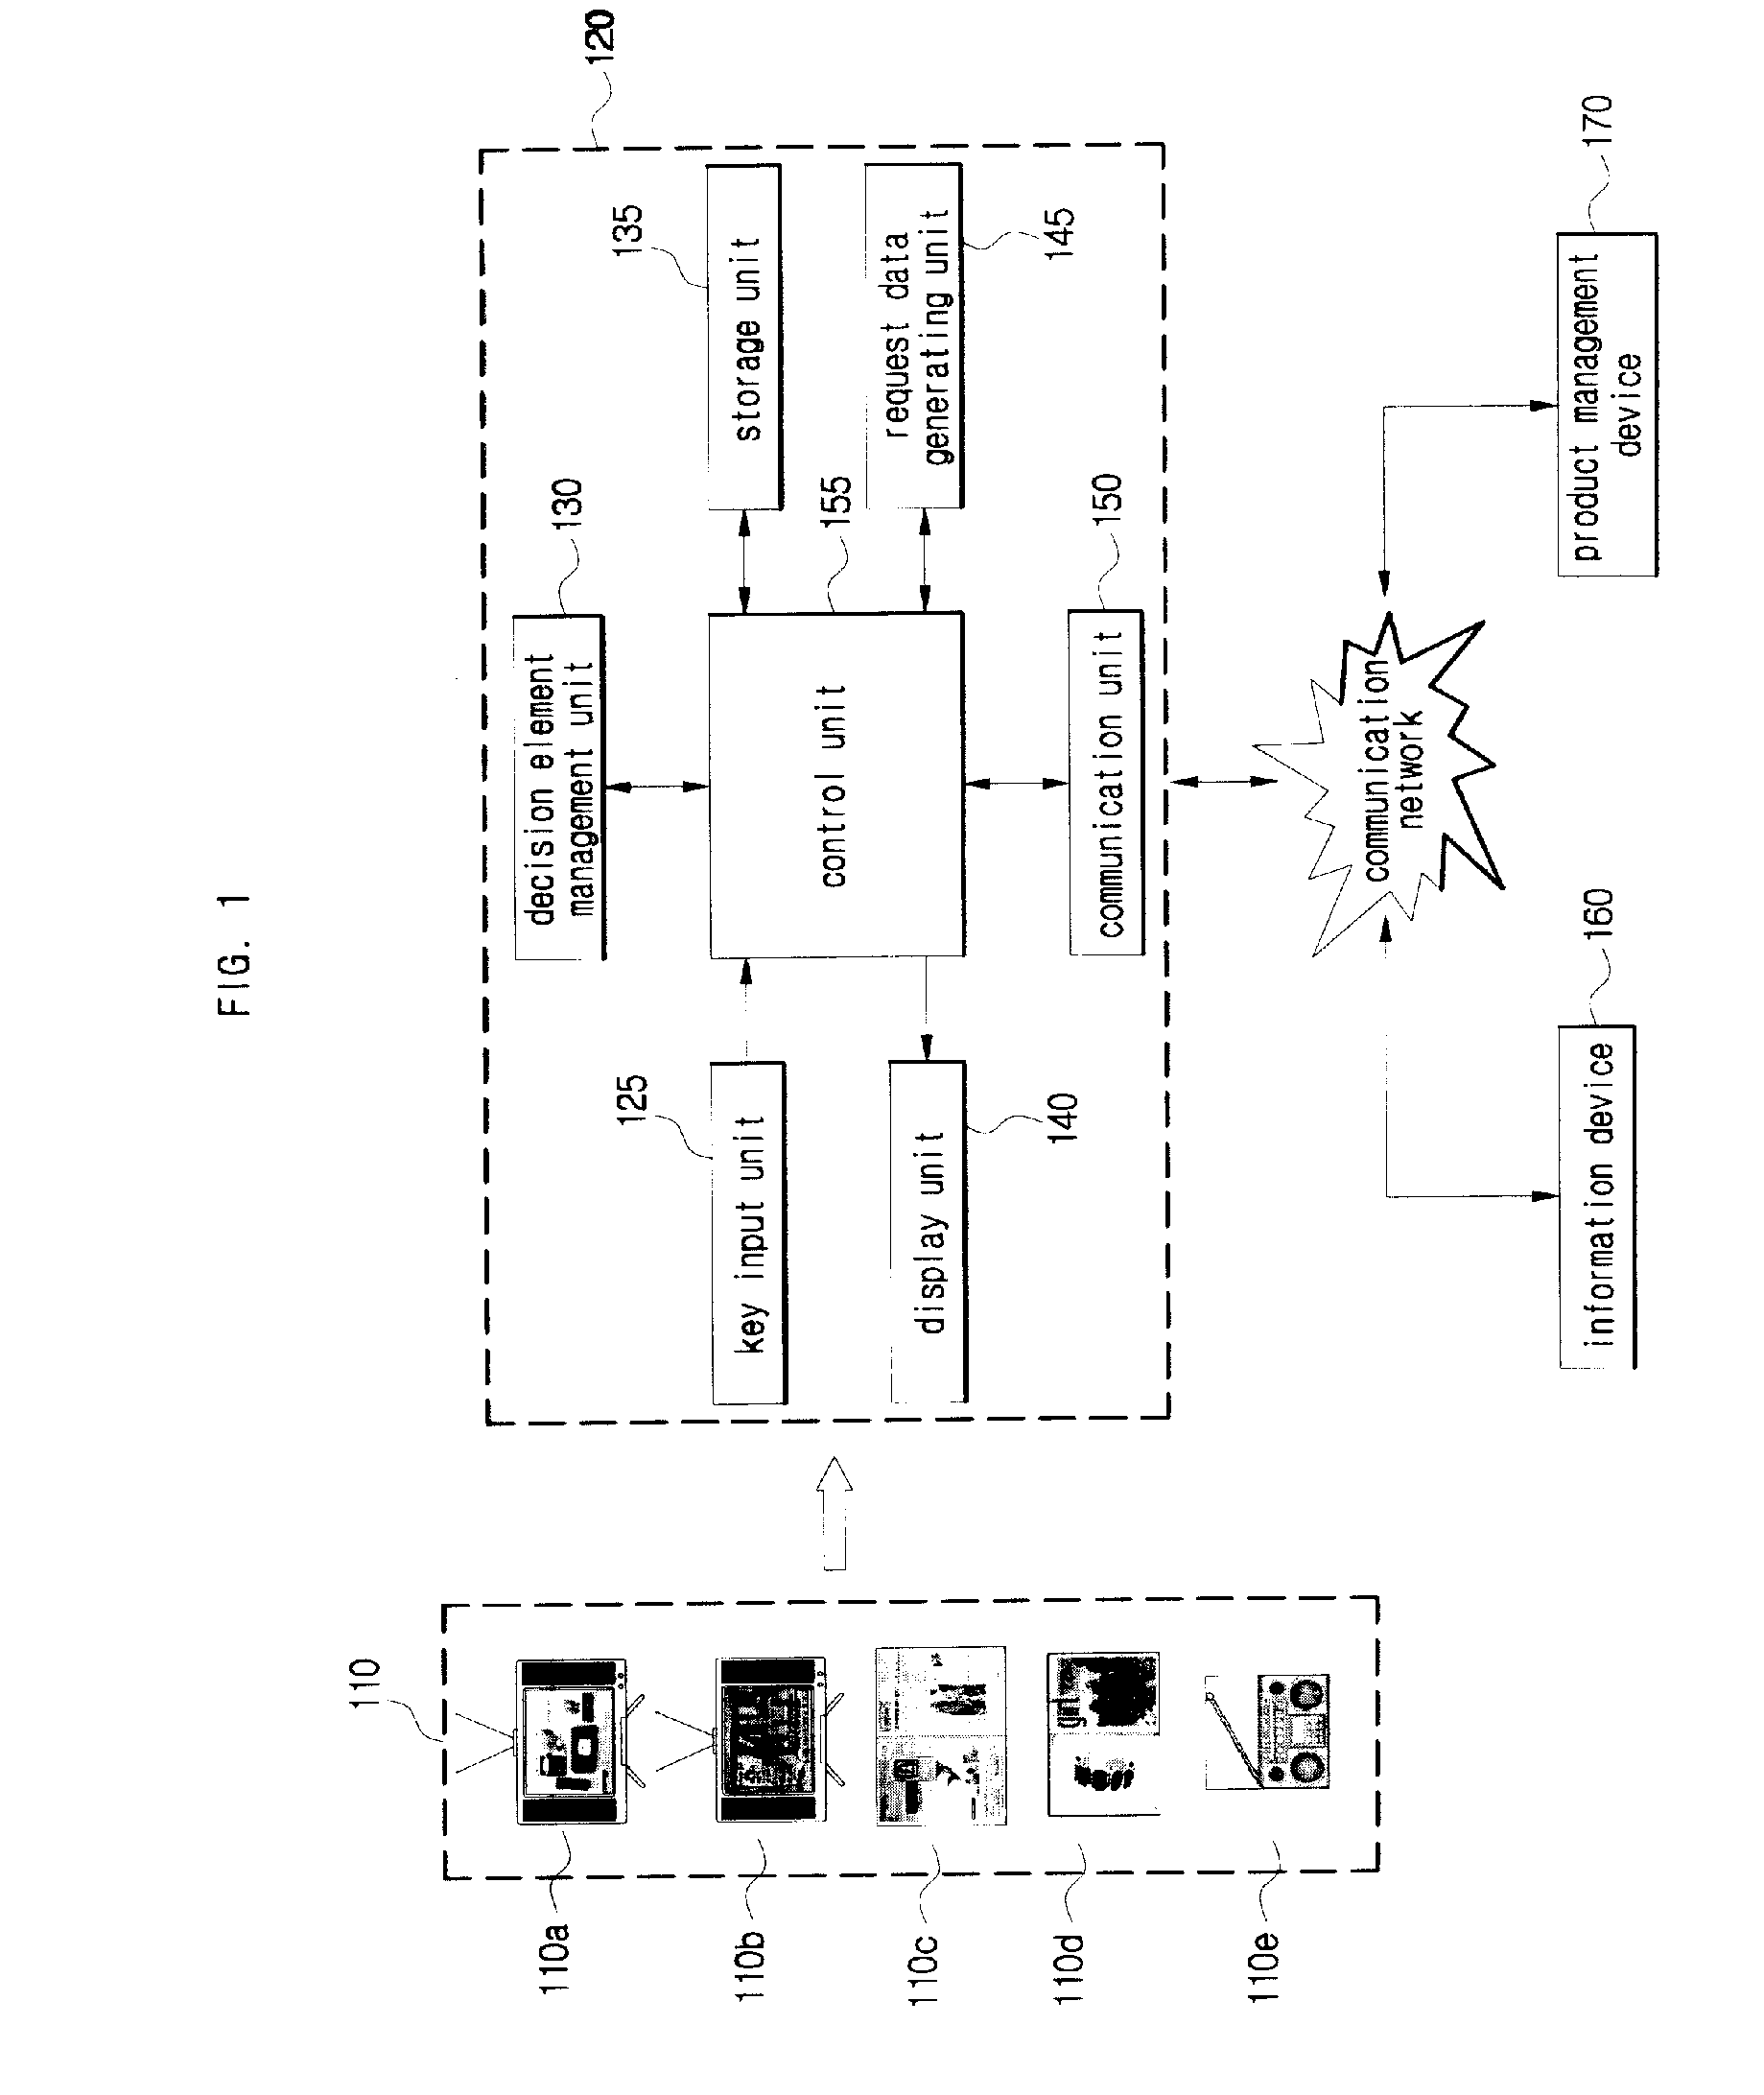 Method and Apparatus for Requesting Service Using Access Code